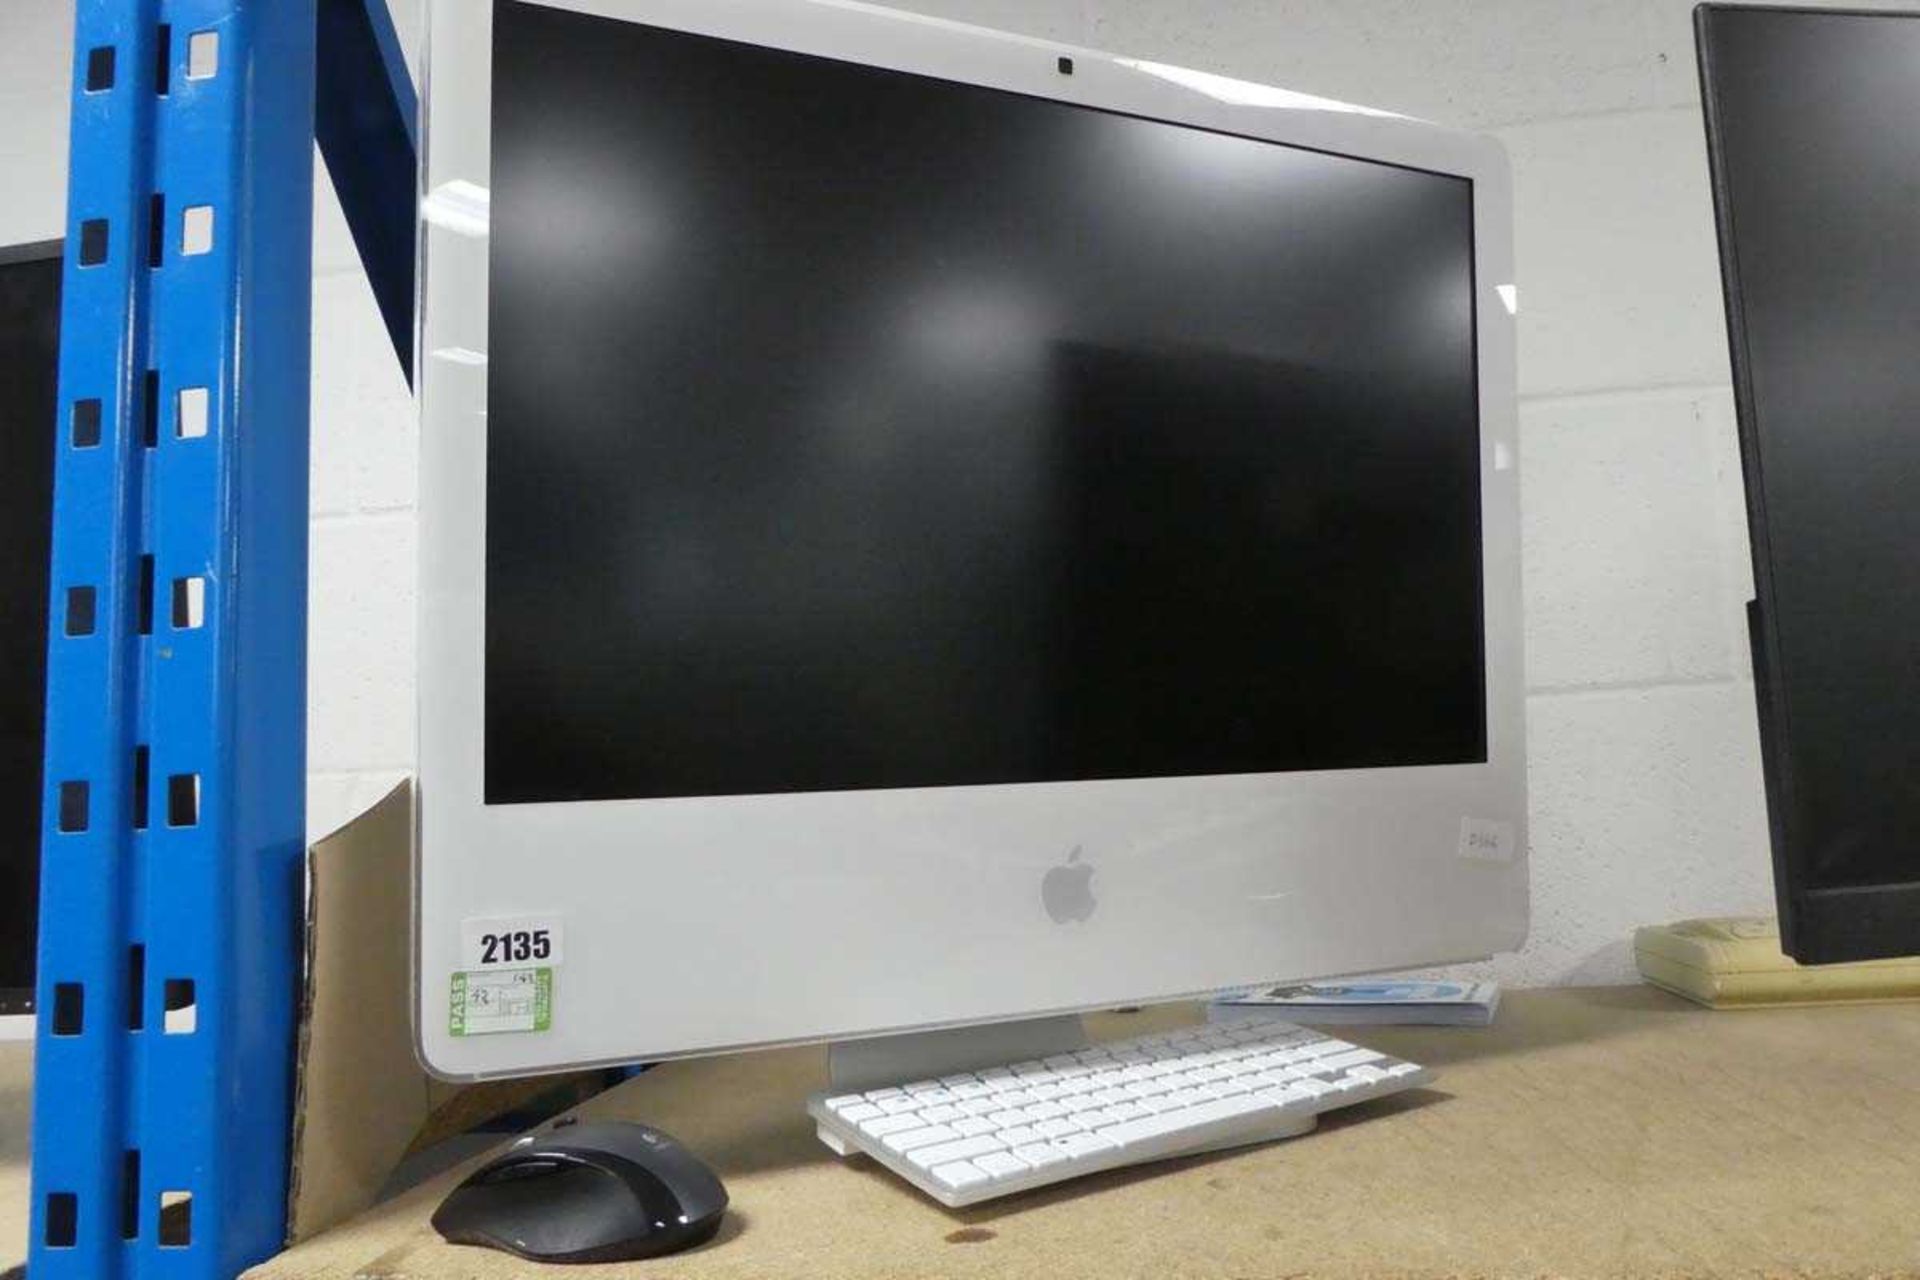 Apple iMac computer with replacement keyboard and mouse